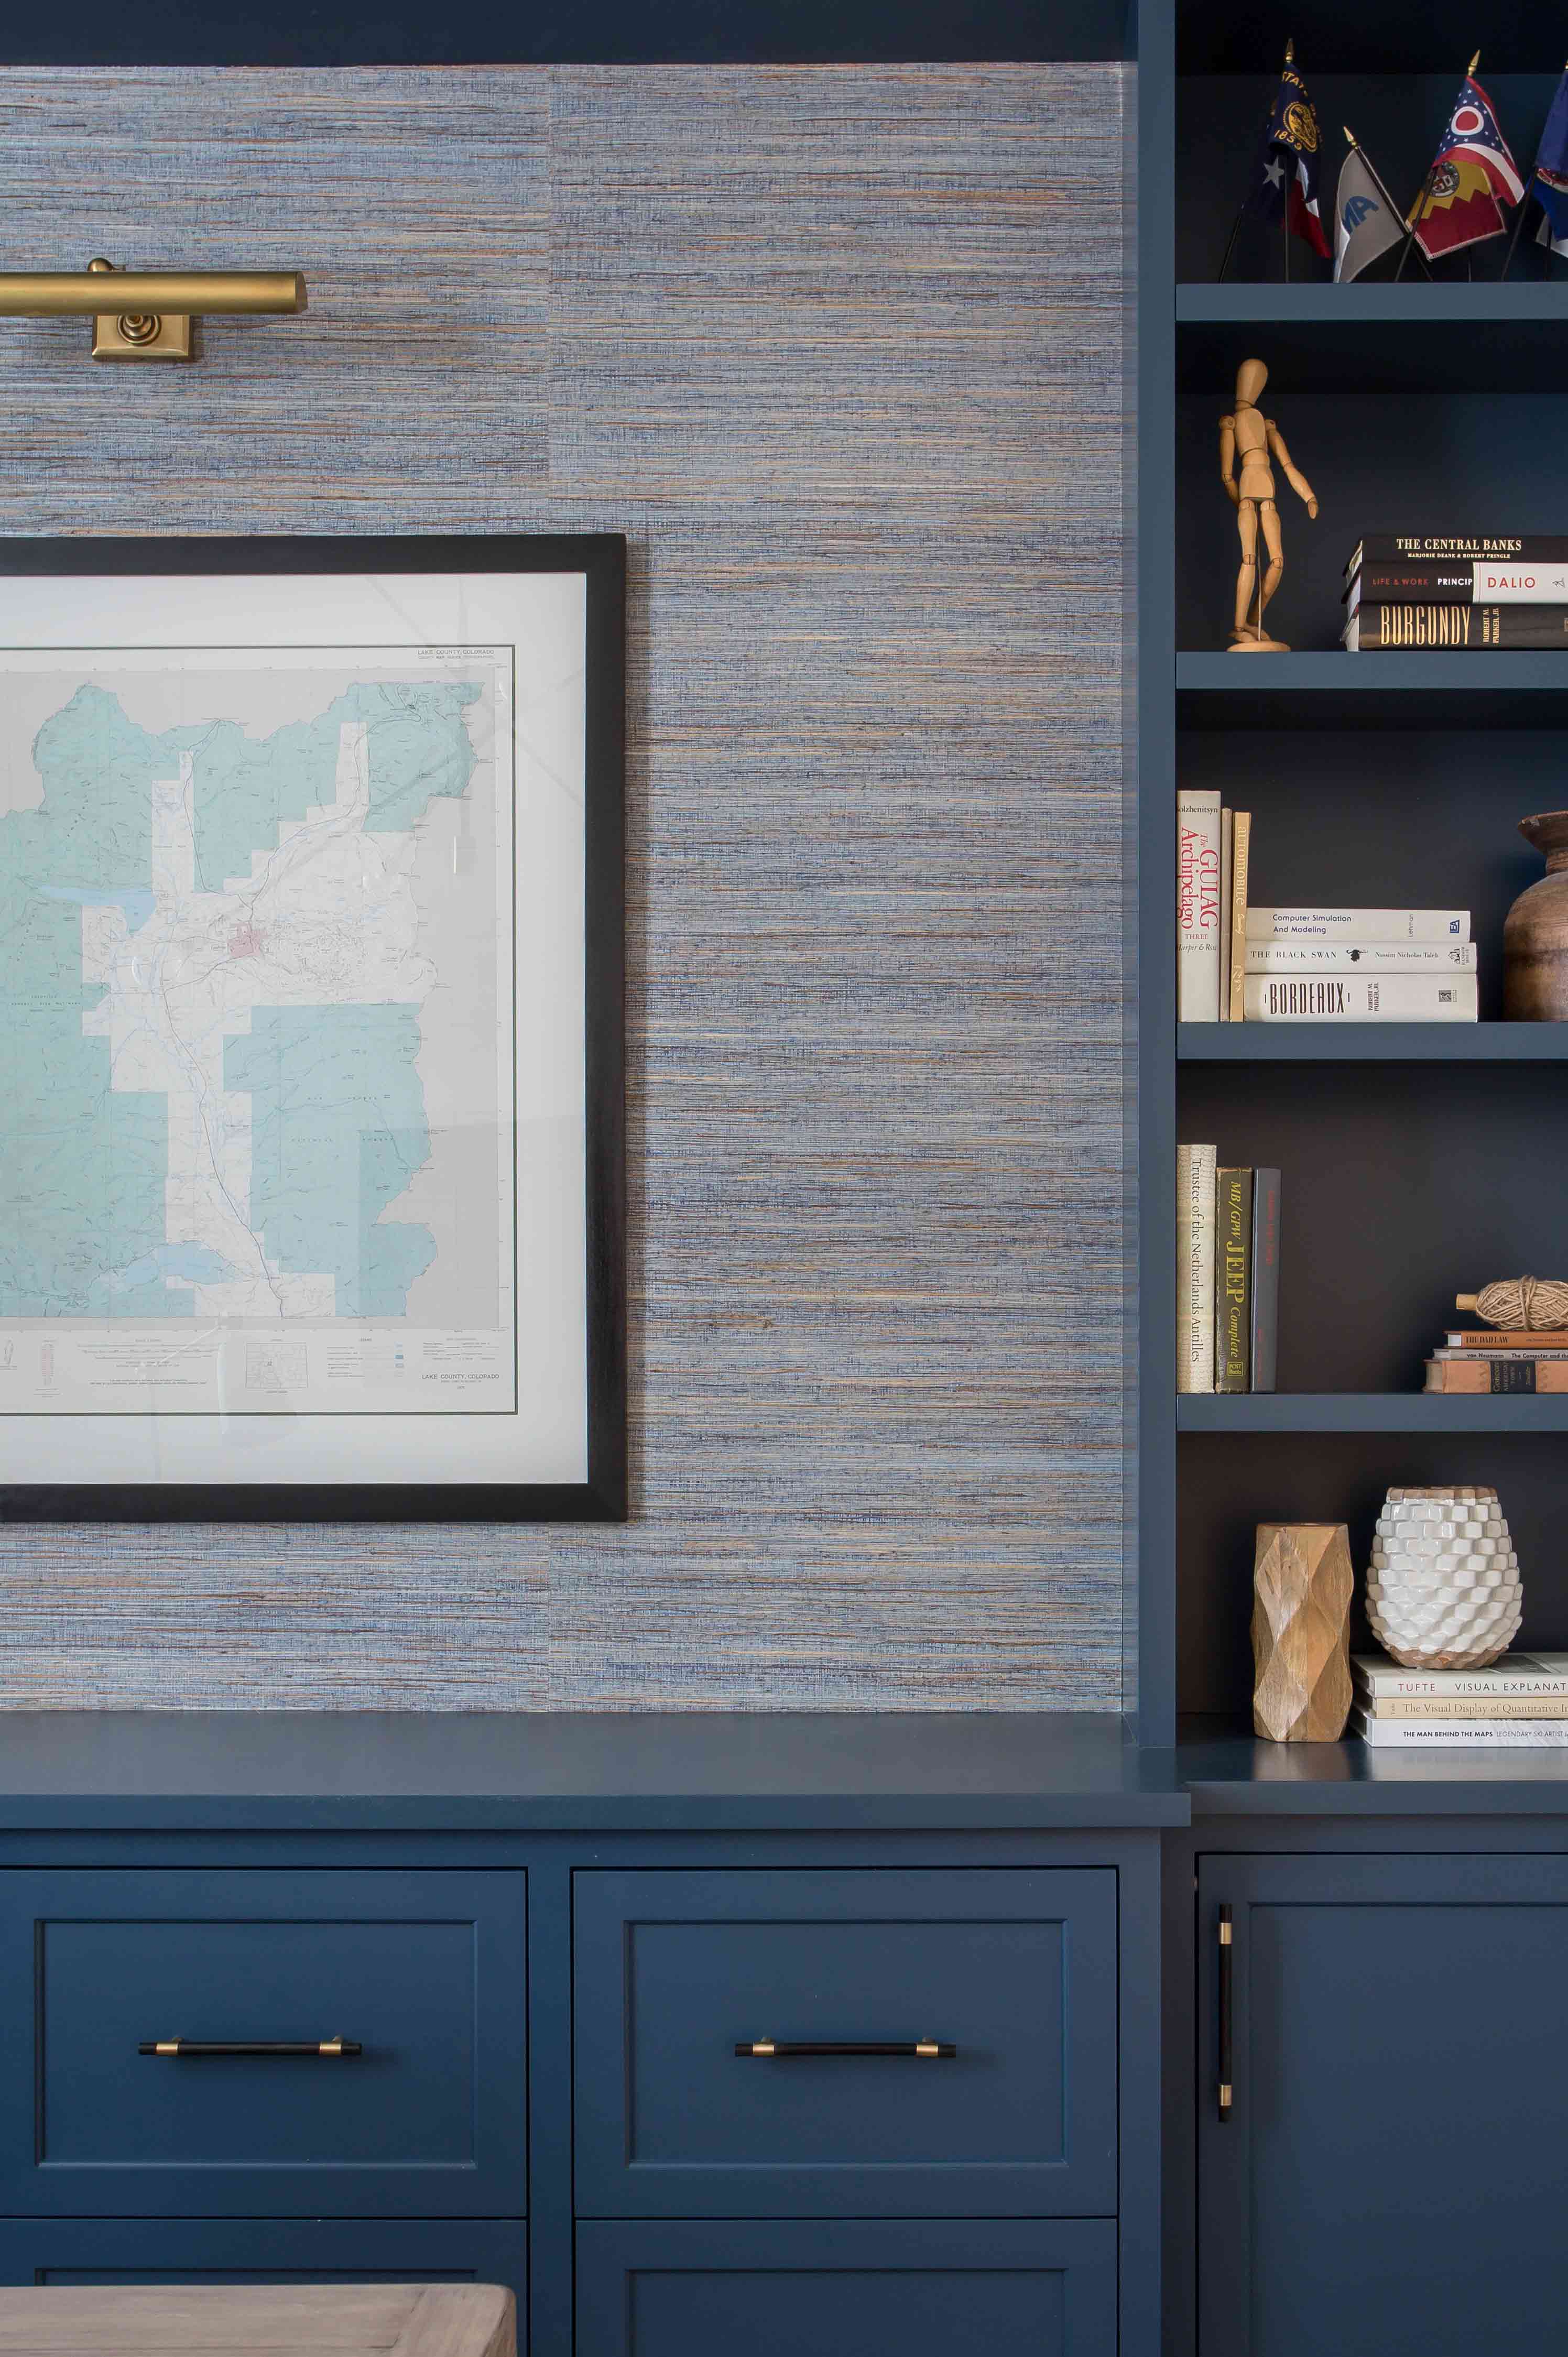 Light blue textured grasscloth wall with framed old map and cadet-blue bookshelf nearby.